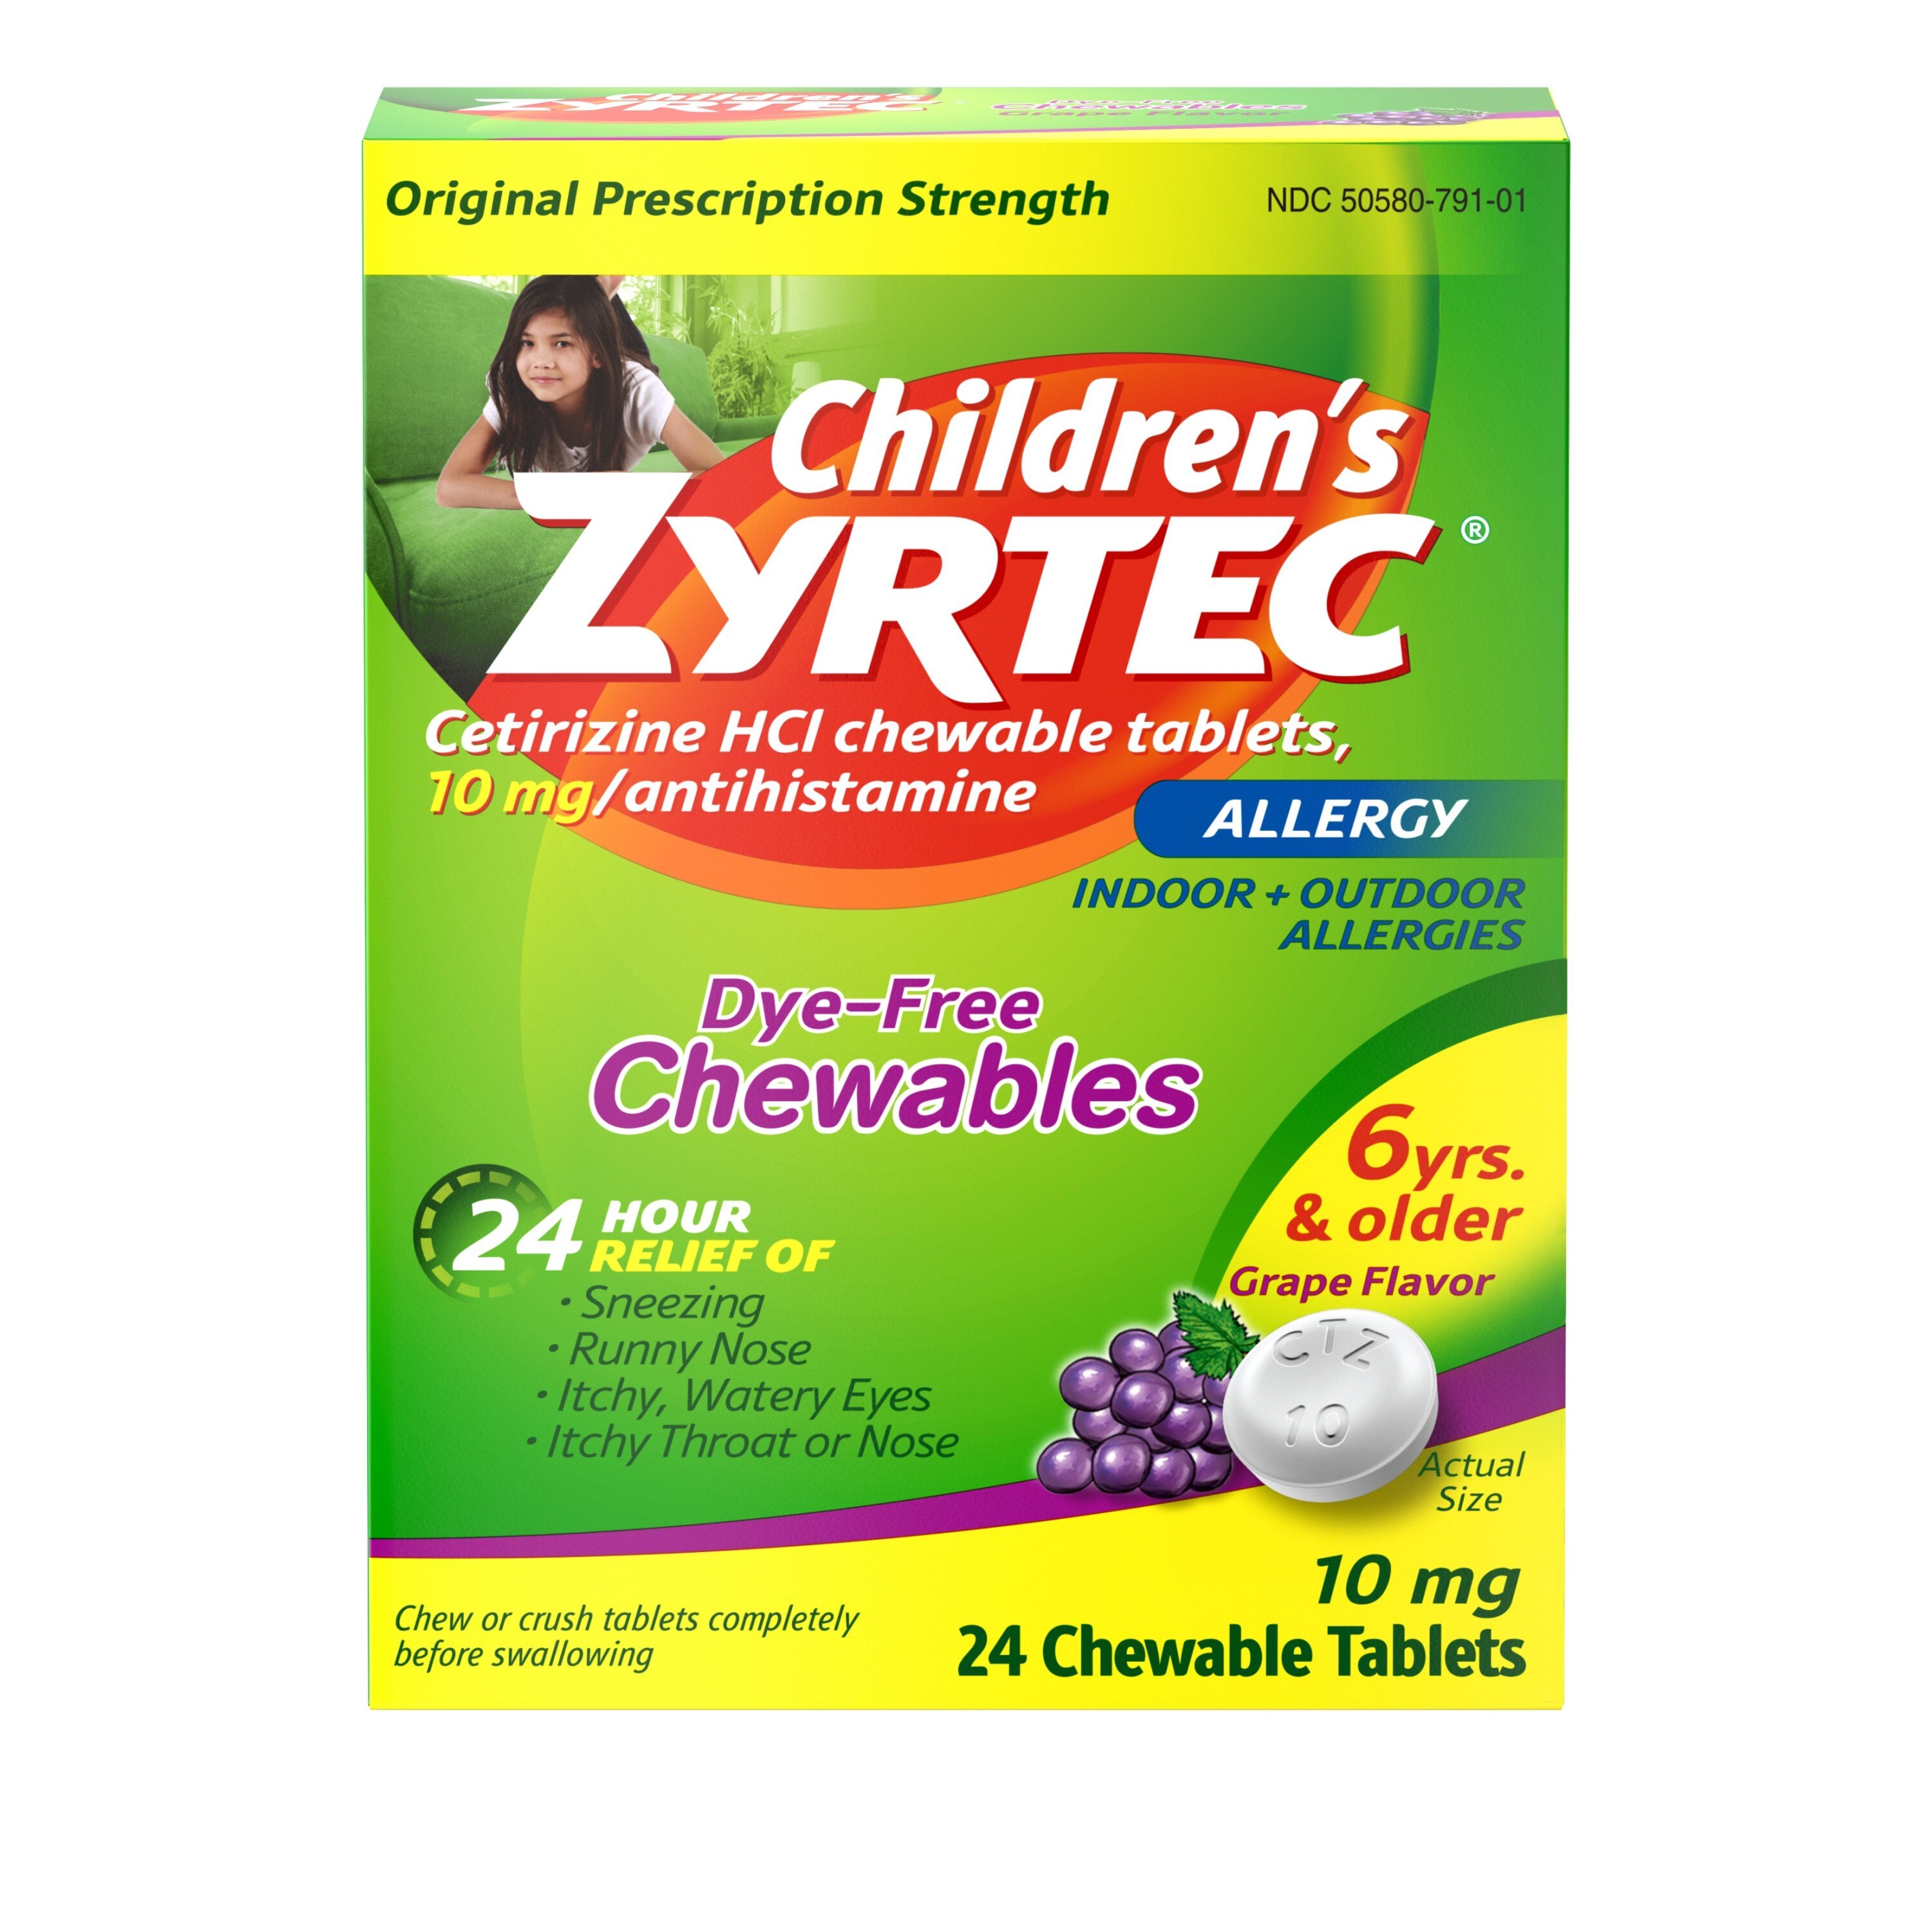 Zyrtec Children's 24HR Dye-Free Allergy Relief Chewable Tablets, 10mg Cetirizine HCl, Grape, 24 CT